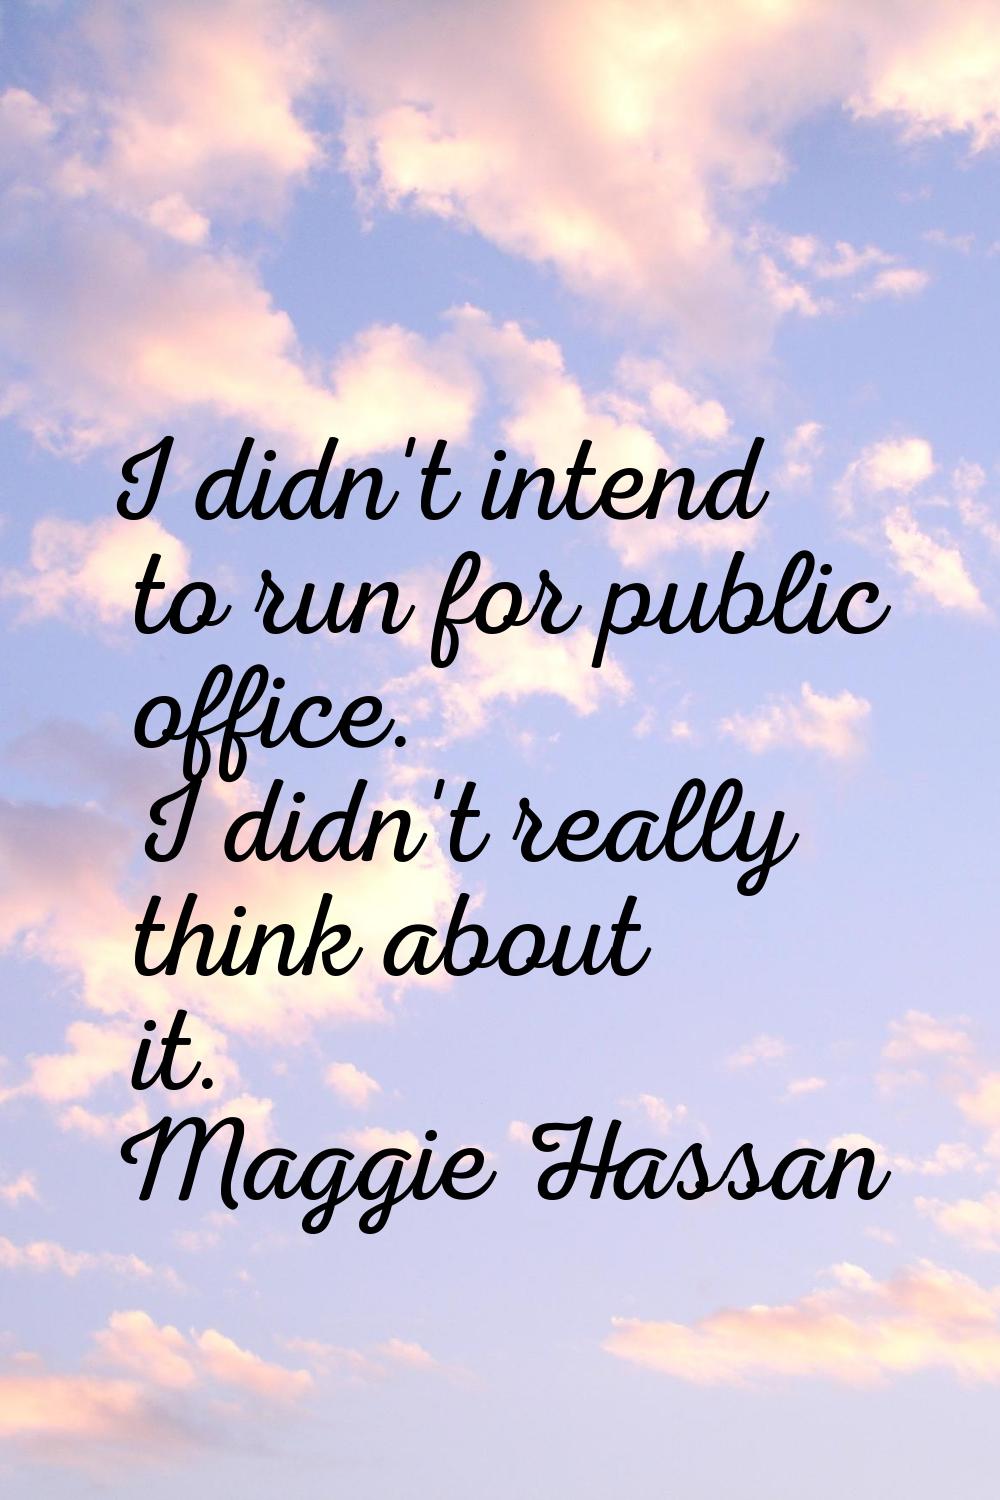 I didn't intend to run for public office. I didn't really think about it.